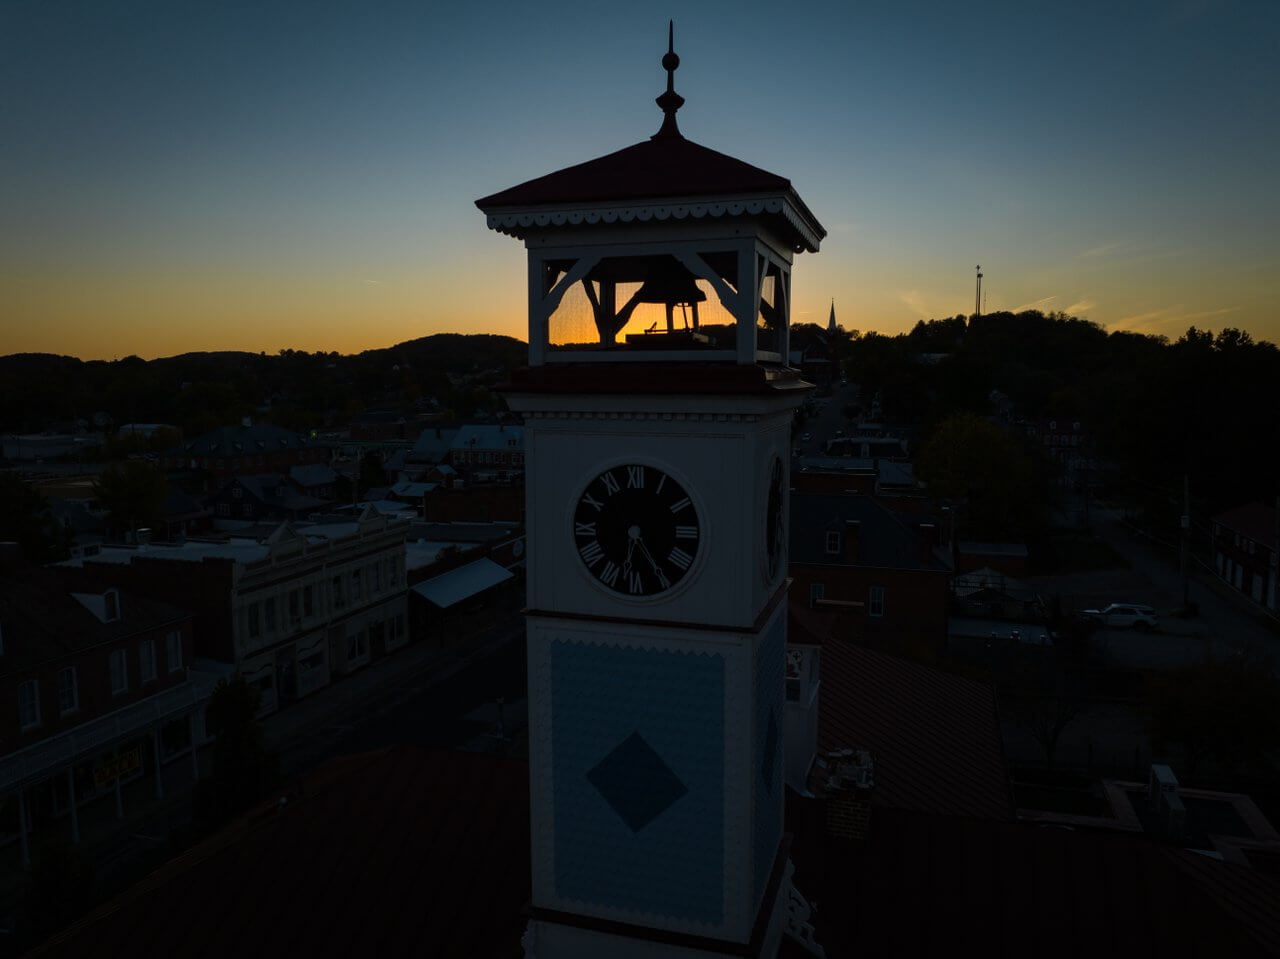 Sunset at the clock tower in Hermann, Missouri.